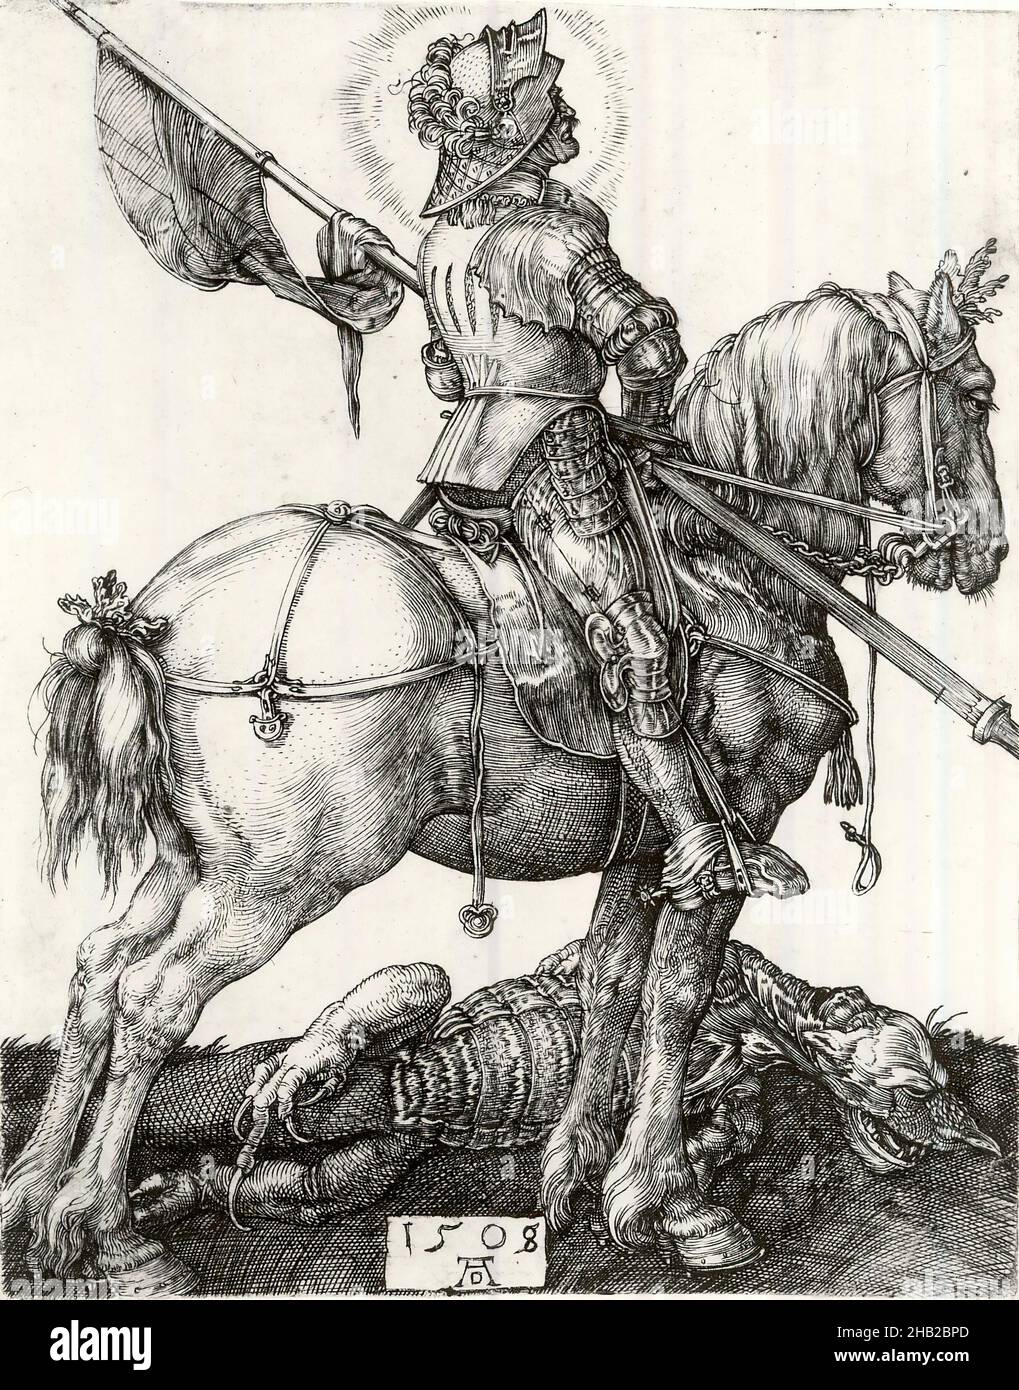 Saint George and the Dragon, Albrecht Dürer, German, 1471-1528, Engraving on laid paper, 1508, 4 1/4 x 3 3/8 in., 10.8 x 8.6 cm, crusader, dragon, flag, halo, horse, knight, powerful, slayer, victorious, war Stock Photo